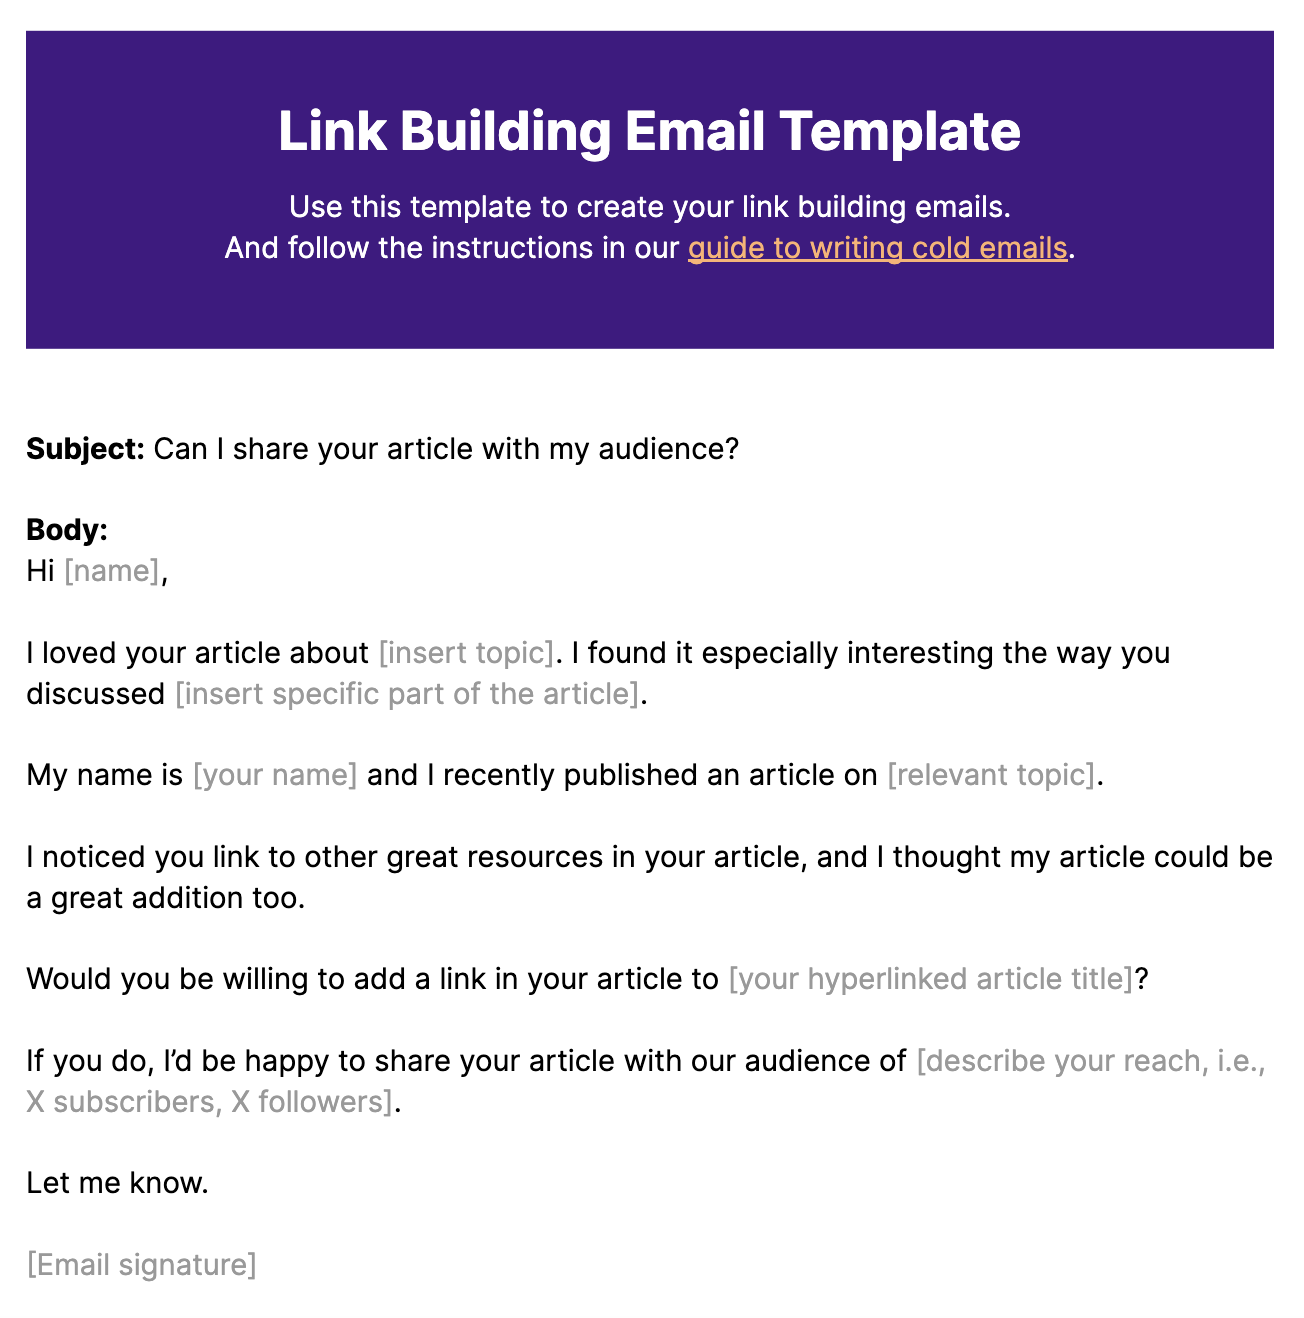 Link Building Email Template